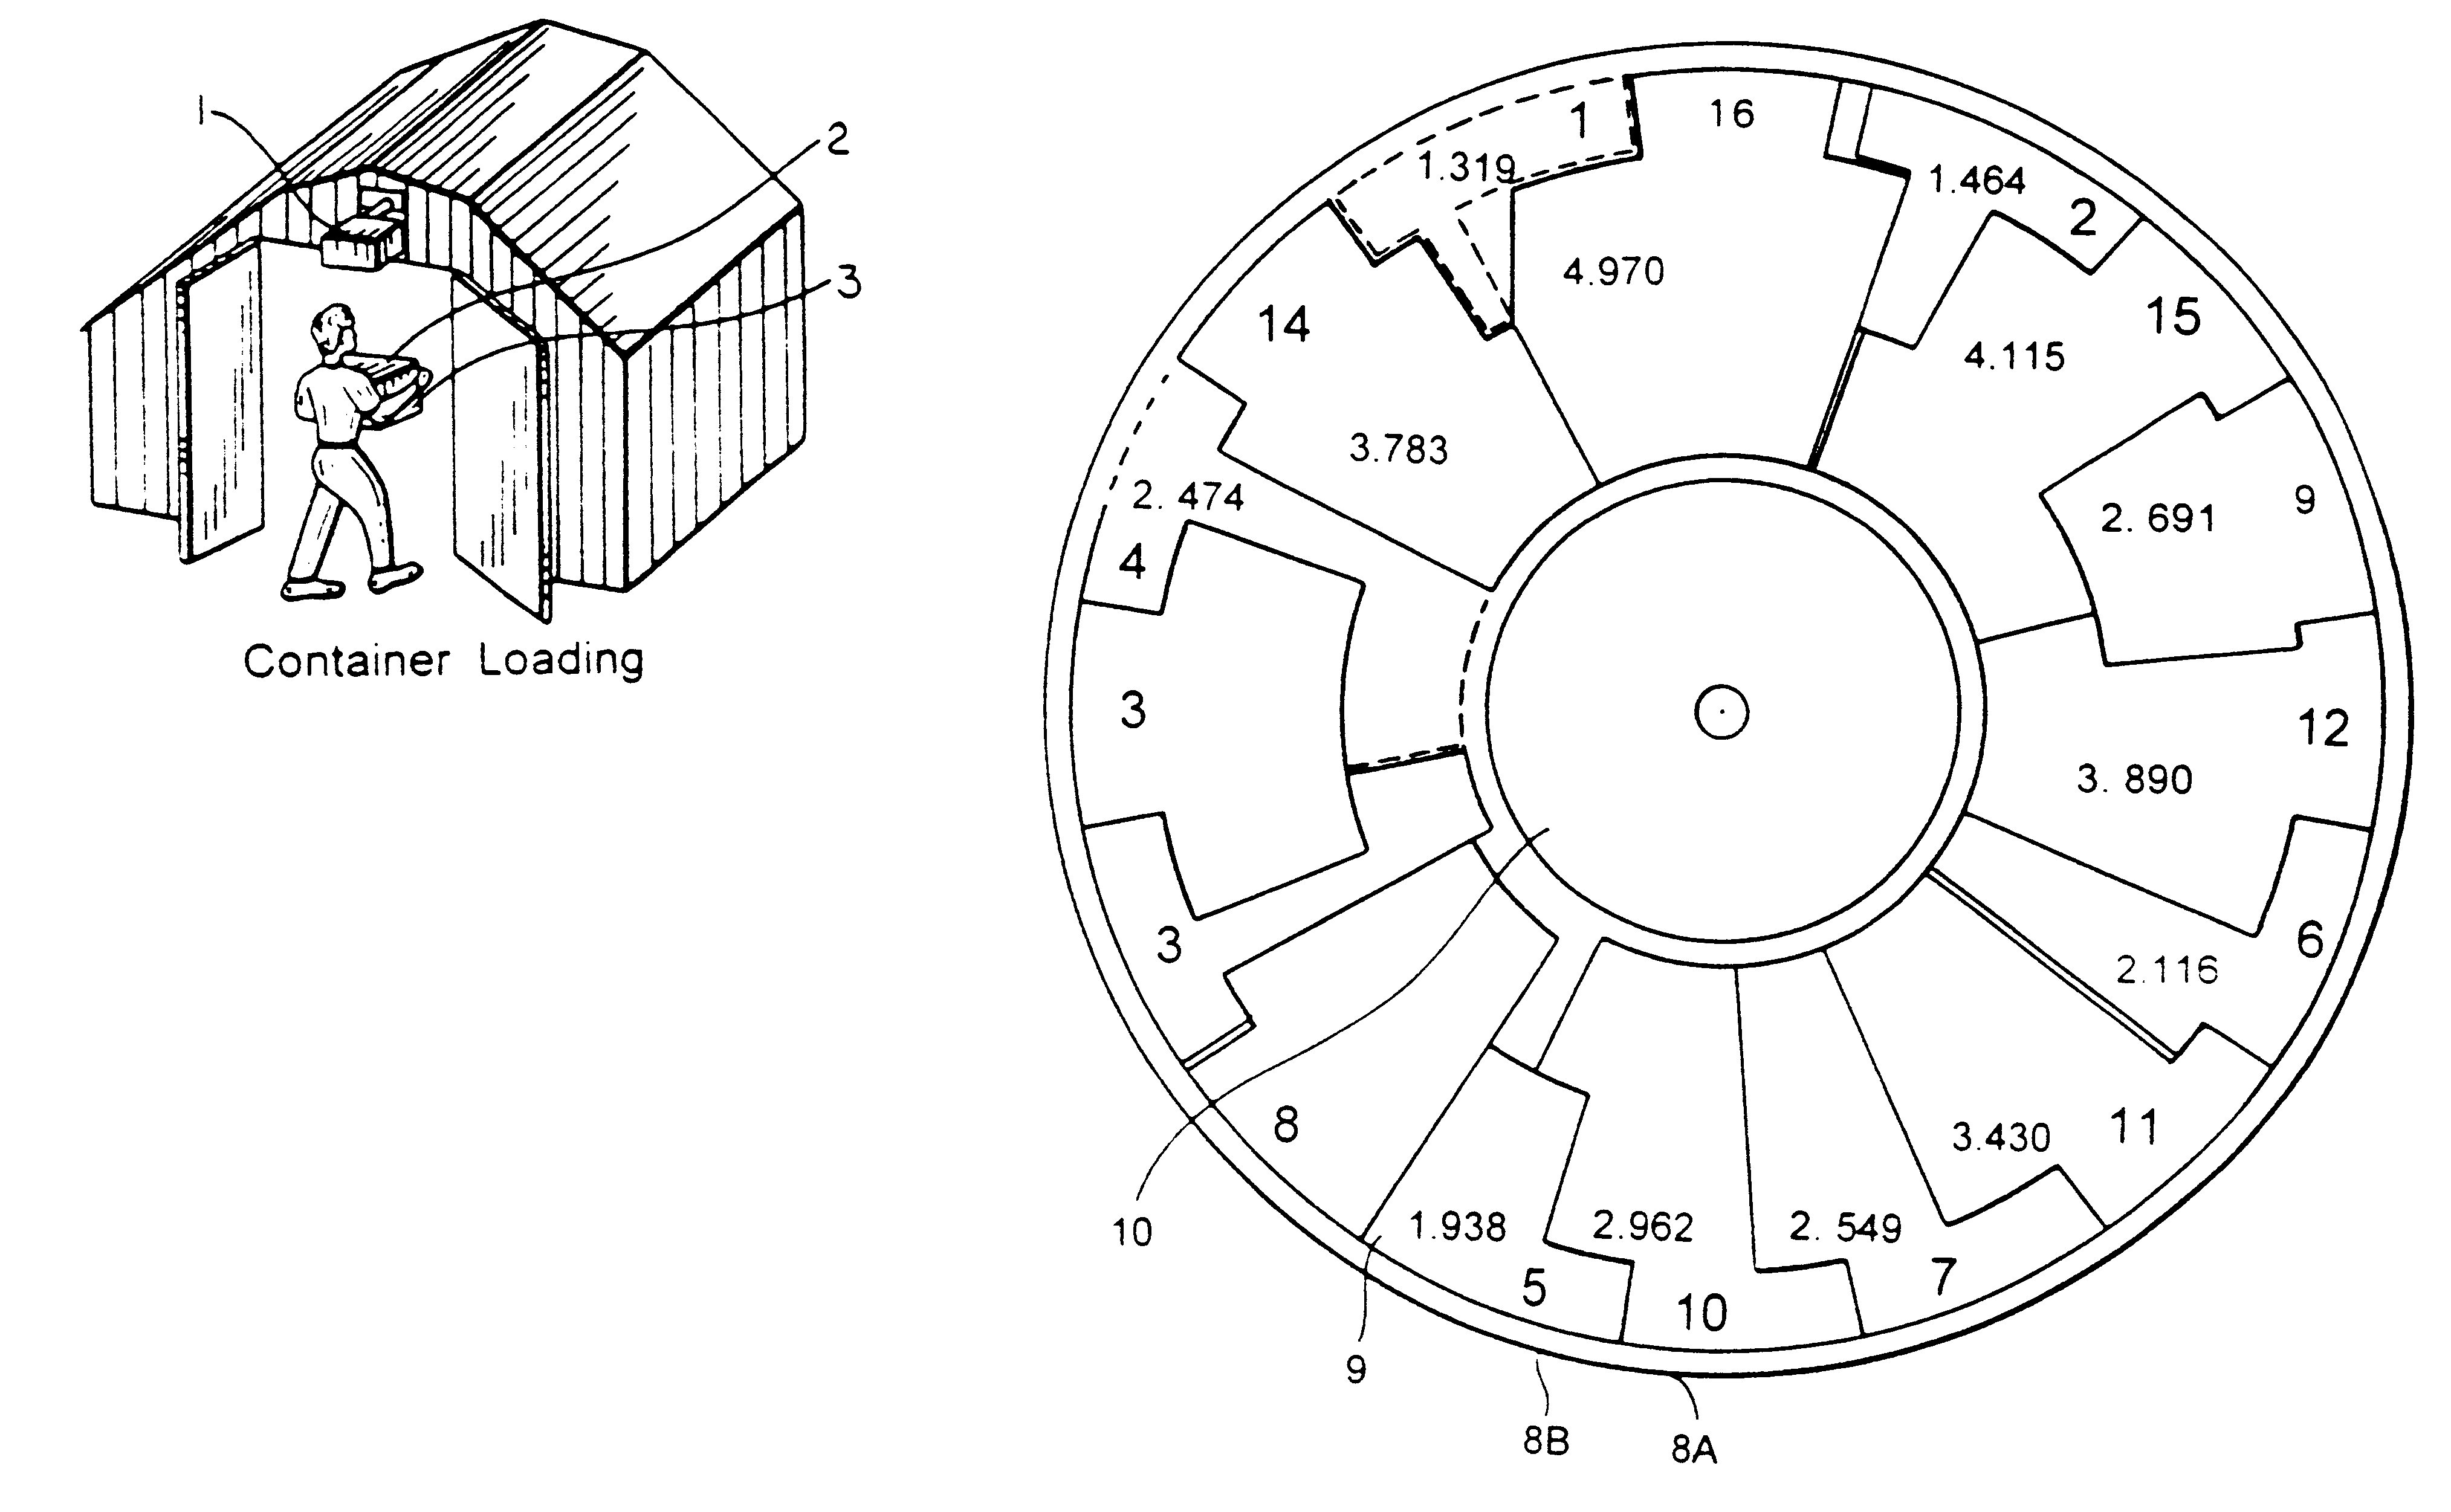 Bar code symbol scanning system having a holographic laser scanning disc utilizing maximum light collection surface area thereof and having scanning facets with optimized light collection efficiency